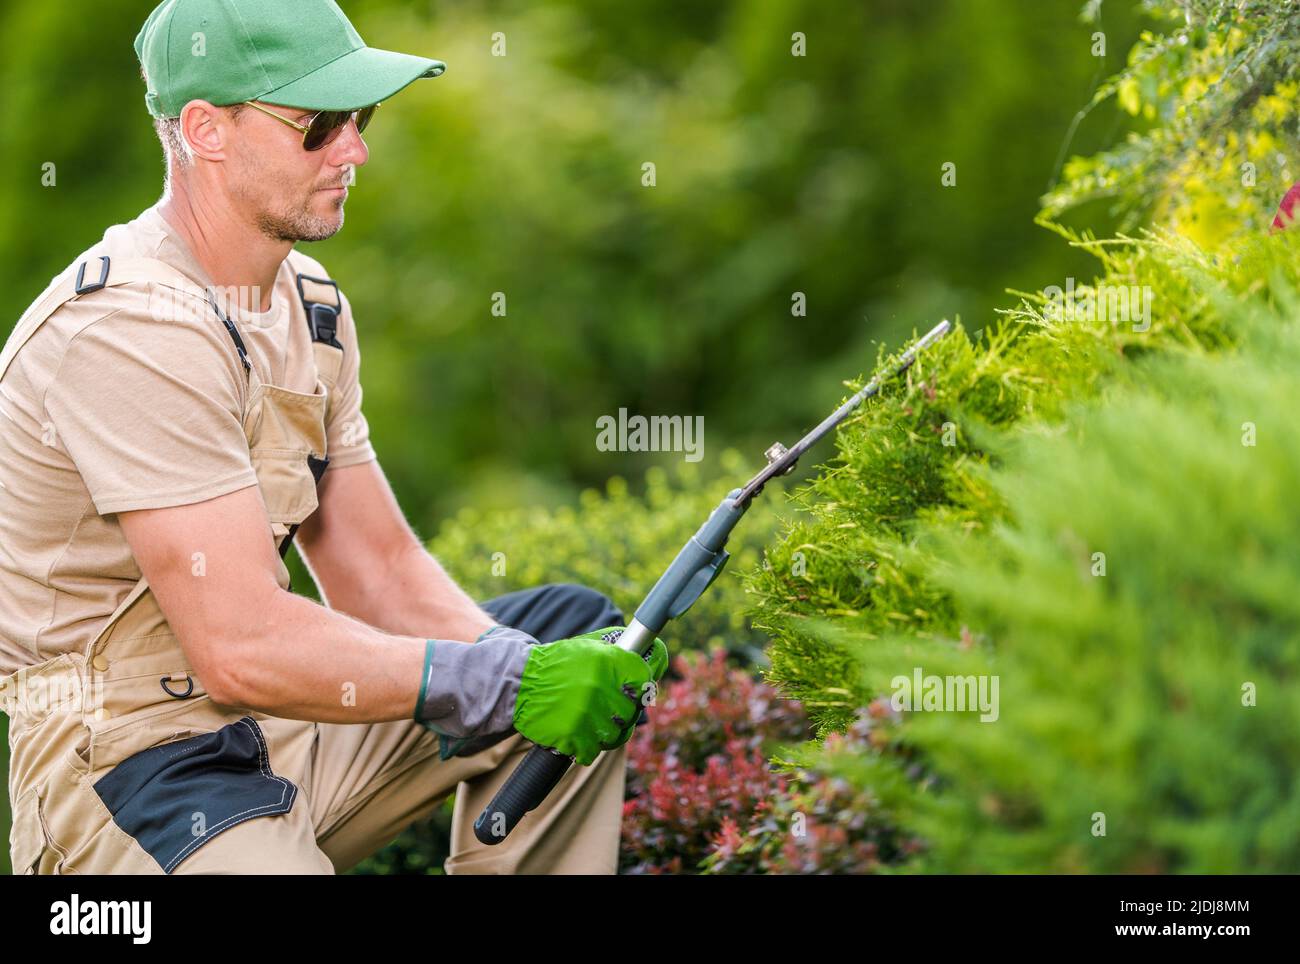 Closeup of Male Caucasian Gardener at His 40s Wearing Sunglasses and Green Cap Enjoying the Process of Pruning Plants Using Professional Garden Scisso Stock Photo